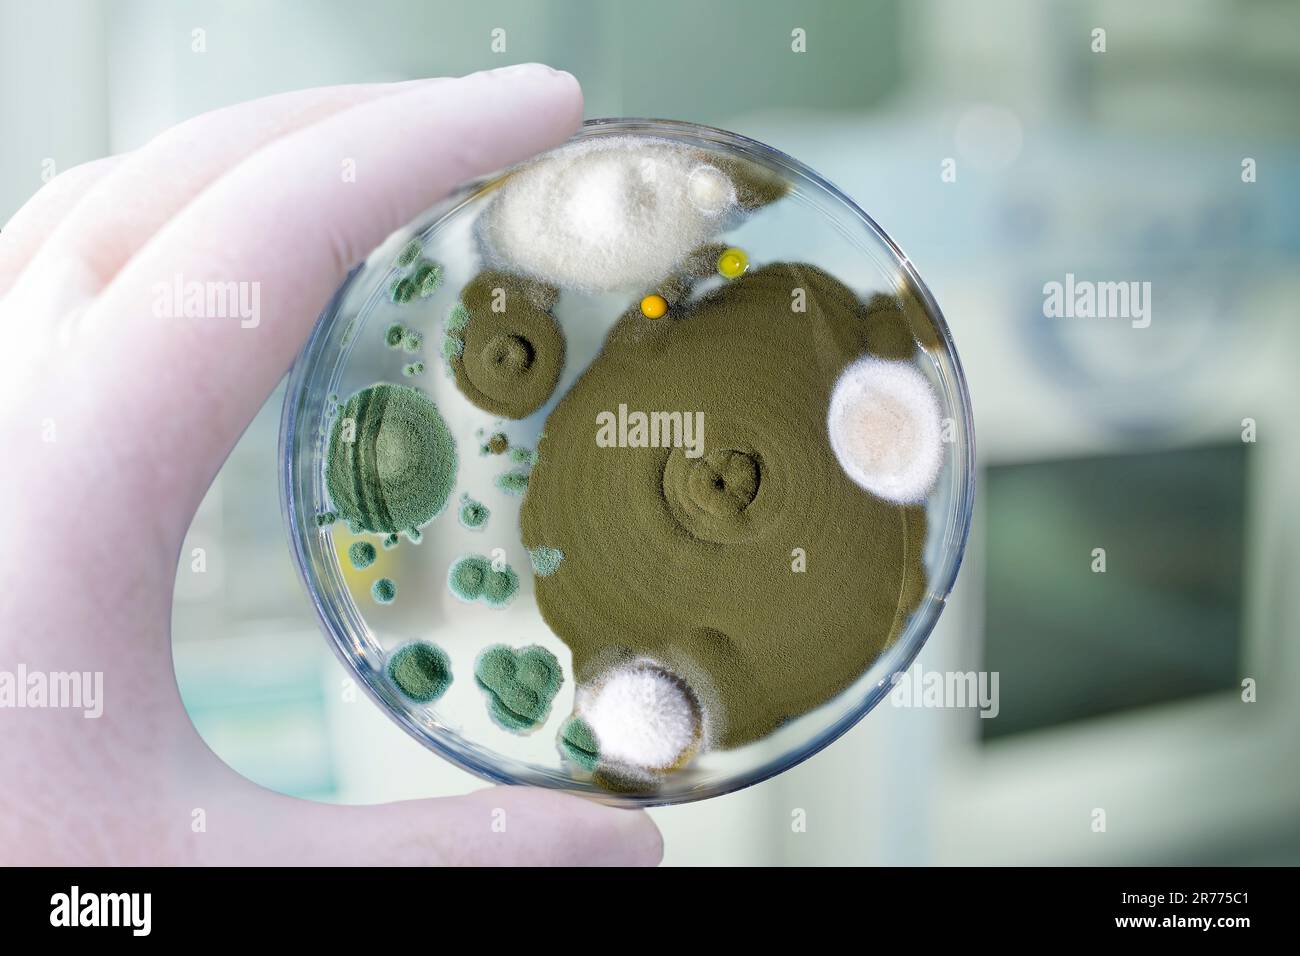 Colonies of different mold fungi grown from indoor air on Petri dish with Sabourad dextrose agar, close-up view. Hand in white glove holding plate wit Stock Photo